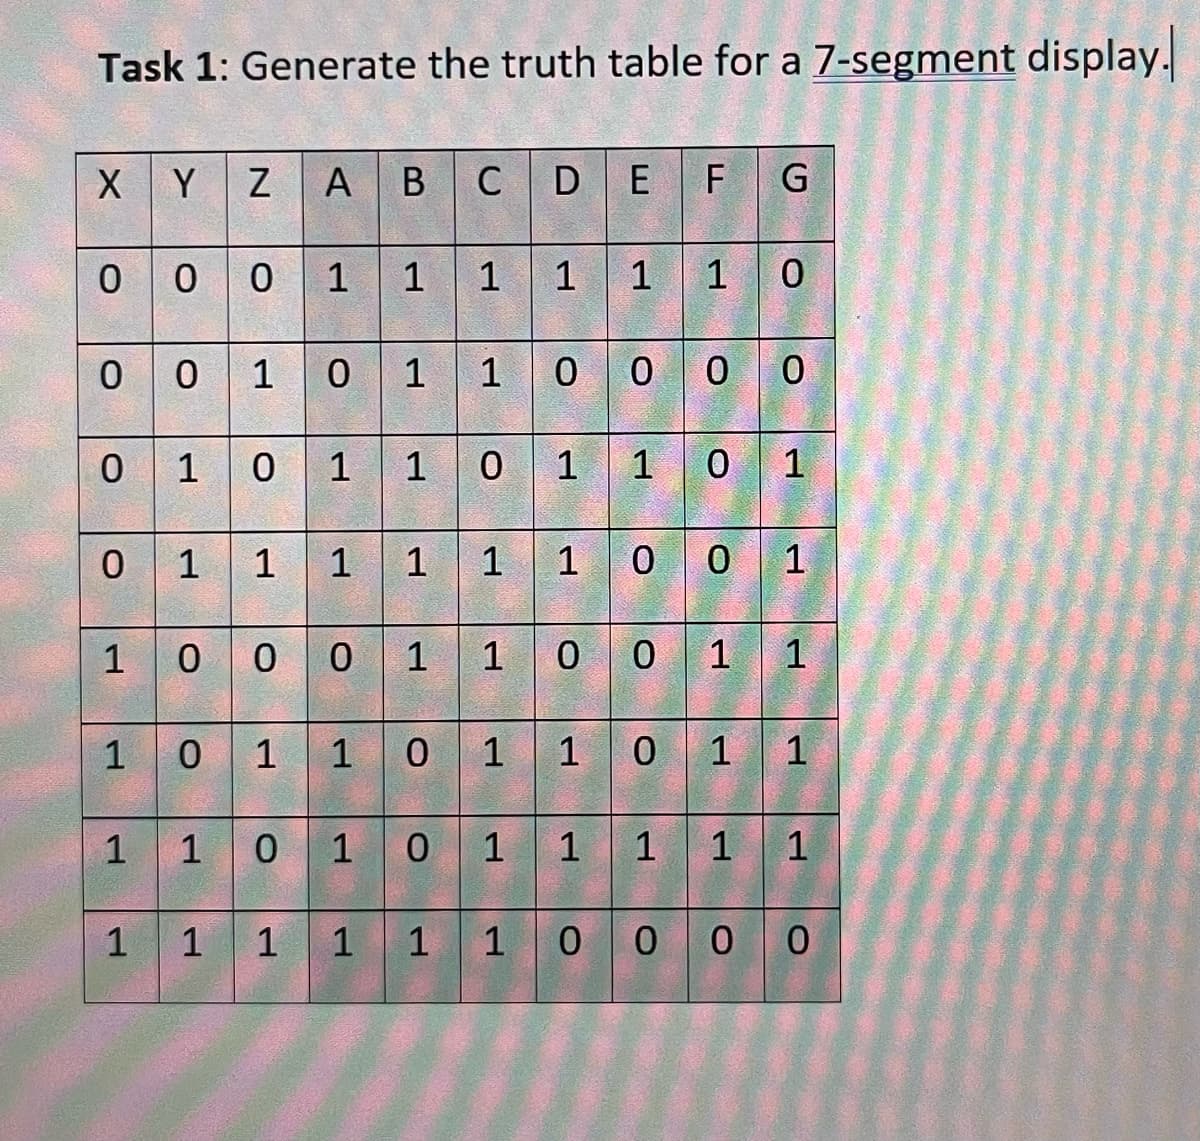 Task 1: Generate the truth table for a 7-segment display.
ZA
0 0 0 1 1 1 1 1 1
X Y
0010110000
0 101 10 0 1
1
0111 1 1 1
10001
1
1
A B C D E F G
0 1
1
1
0
1101
0 1 0 1
0 0 1
1 0 0 1 1
0 1 1 0
1 1
1 1 1 1
1 1 1 1 1 0 0 0 0